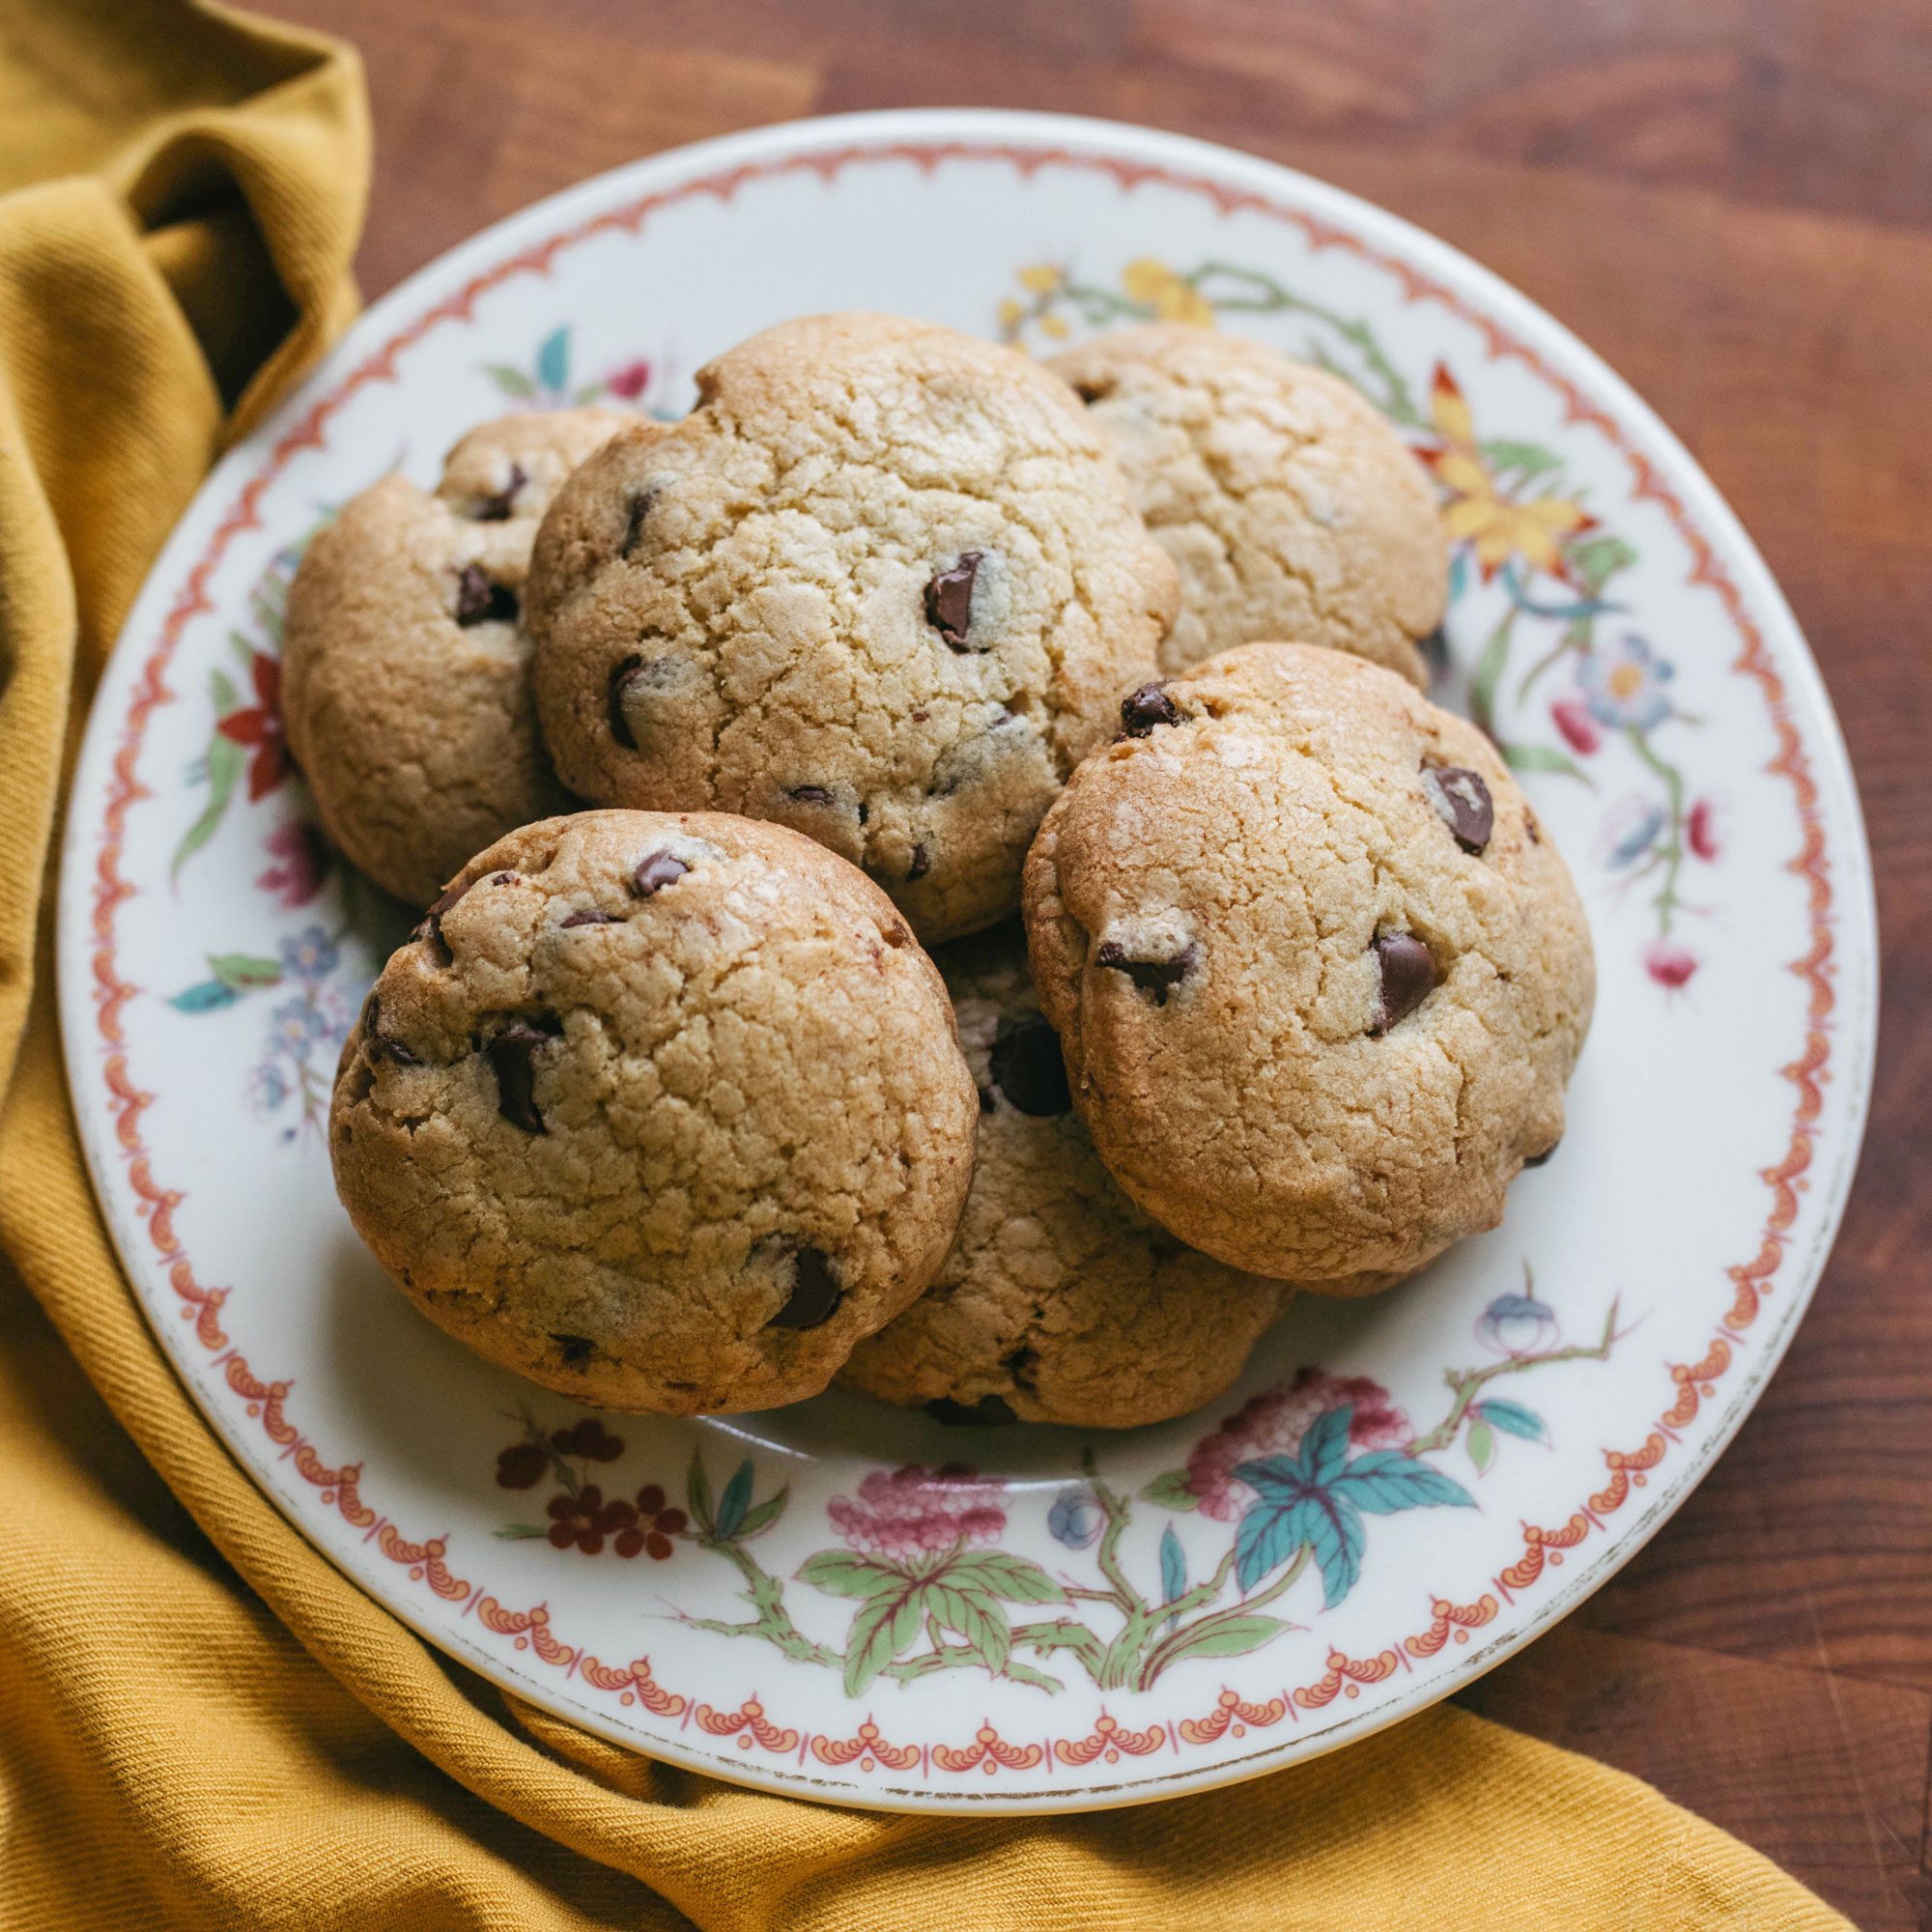 https://www.tasteofhome.com/wp-content/uploads/2021/12/Ghirardelli-Chocolate-Chip-Cookies_Jamie-Thrower-for-Taste-of-Home-sq.jpg?fit=680%2C680